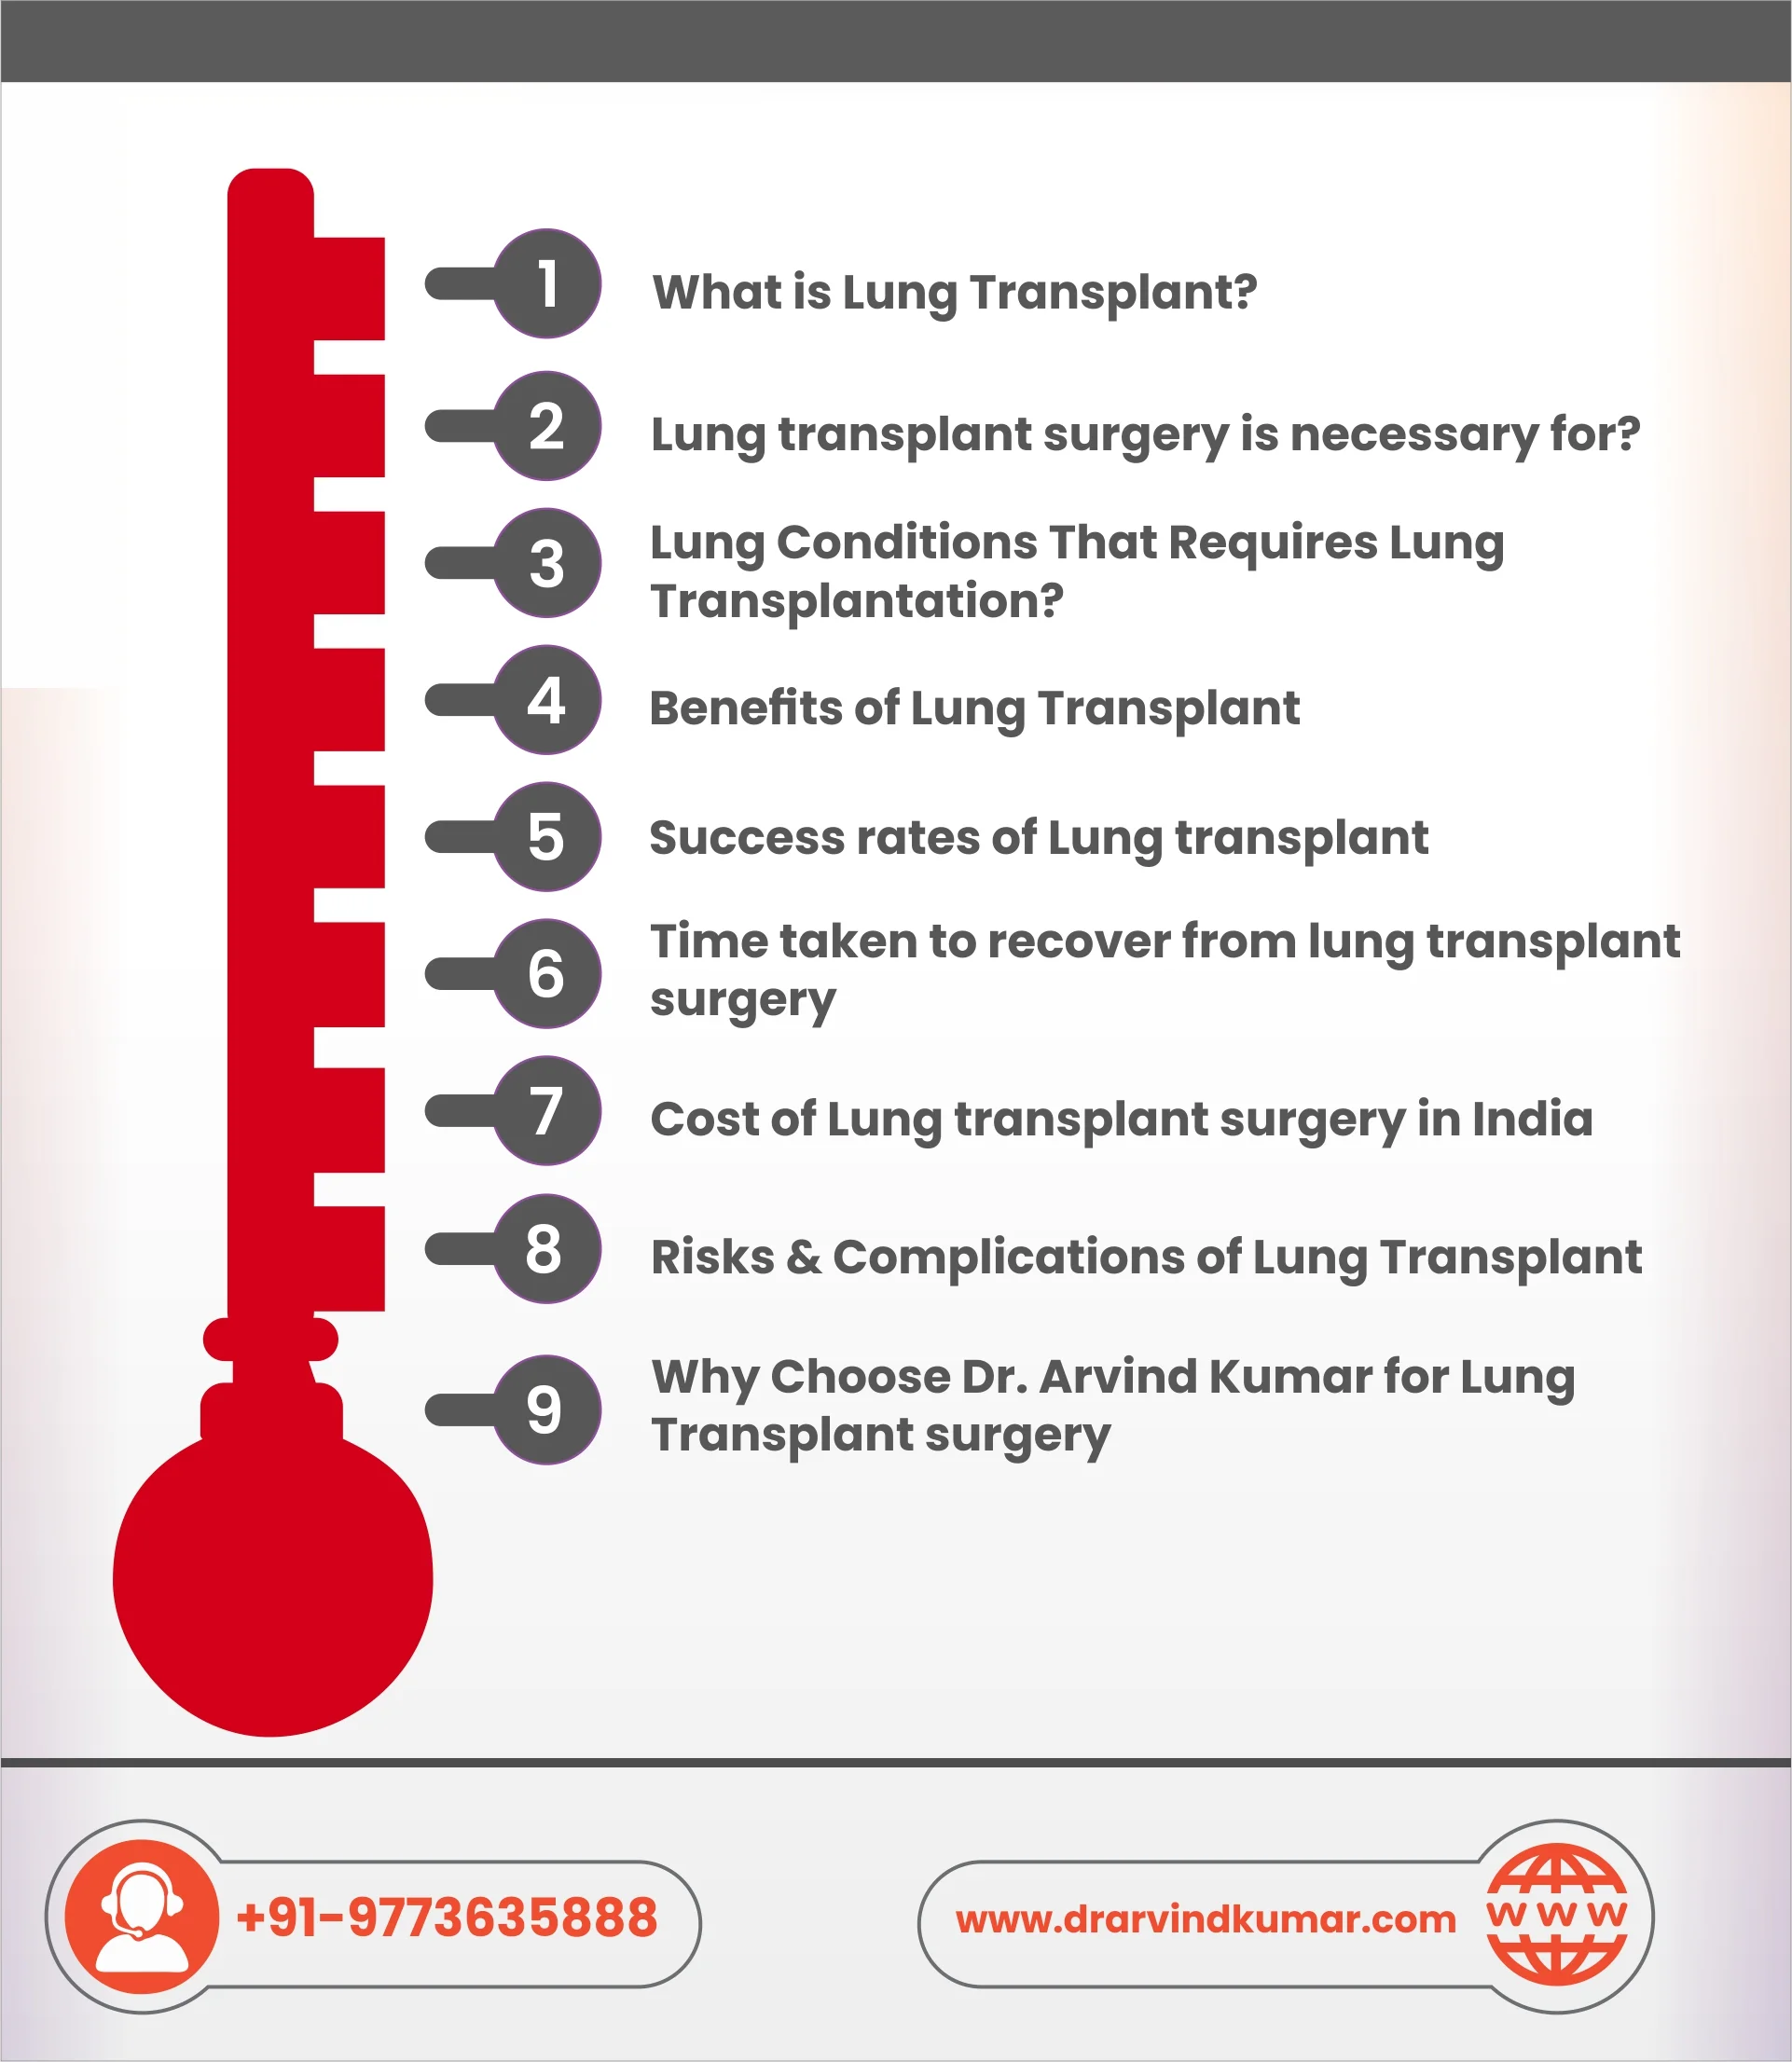 Is a lung transplant possible?